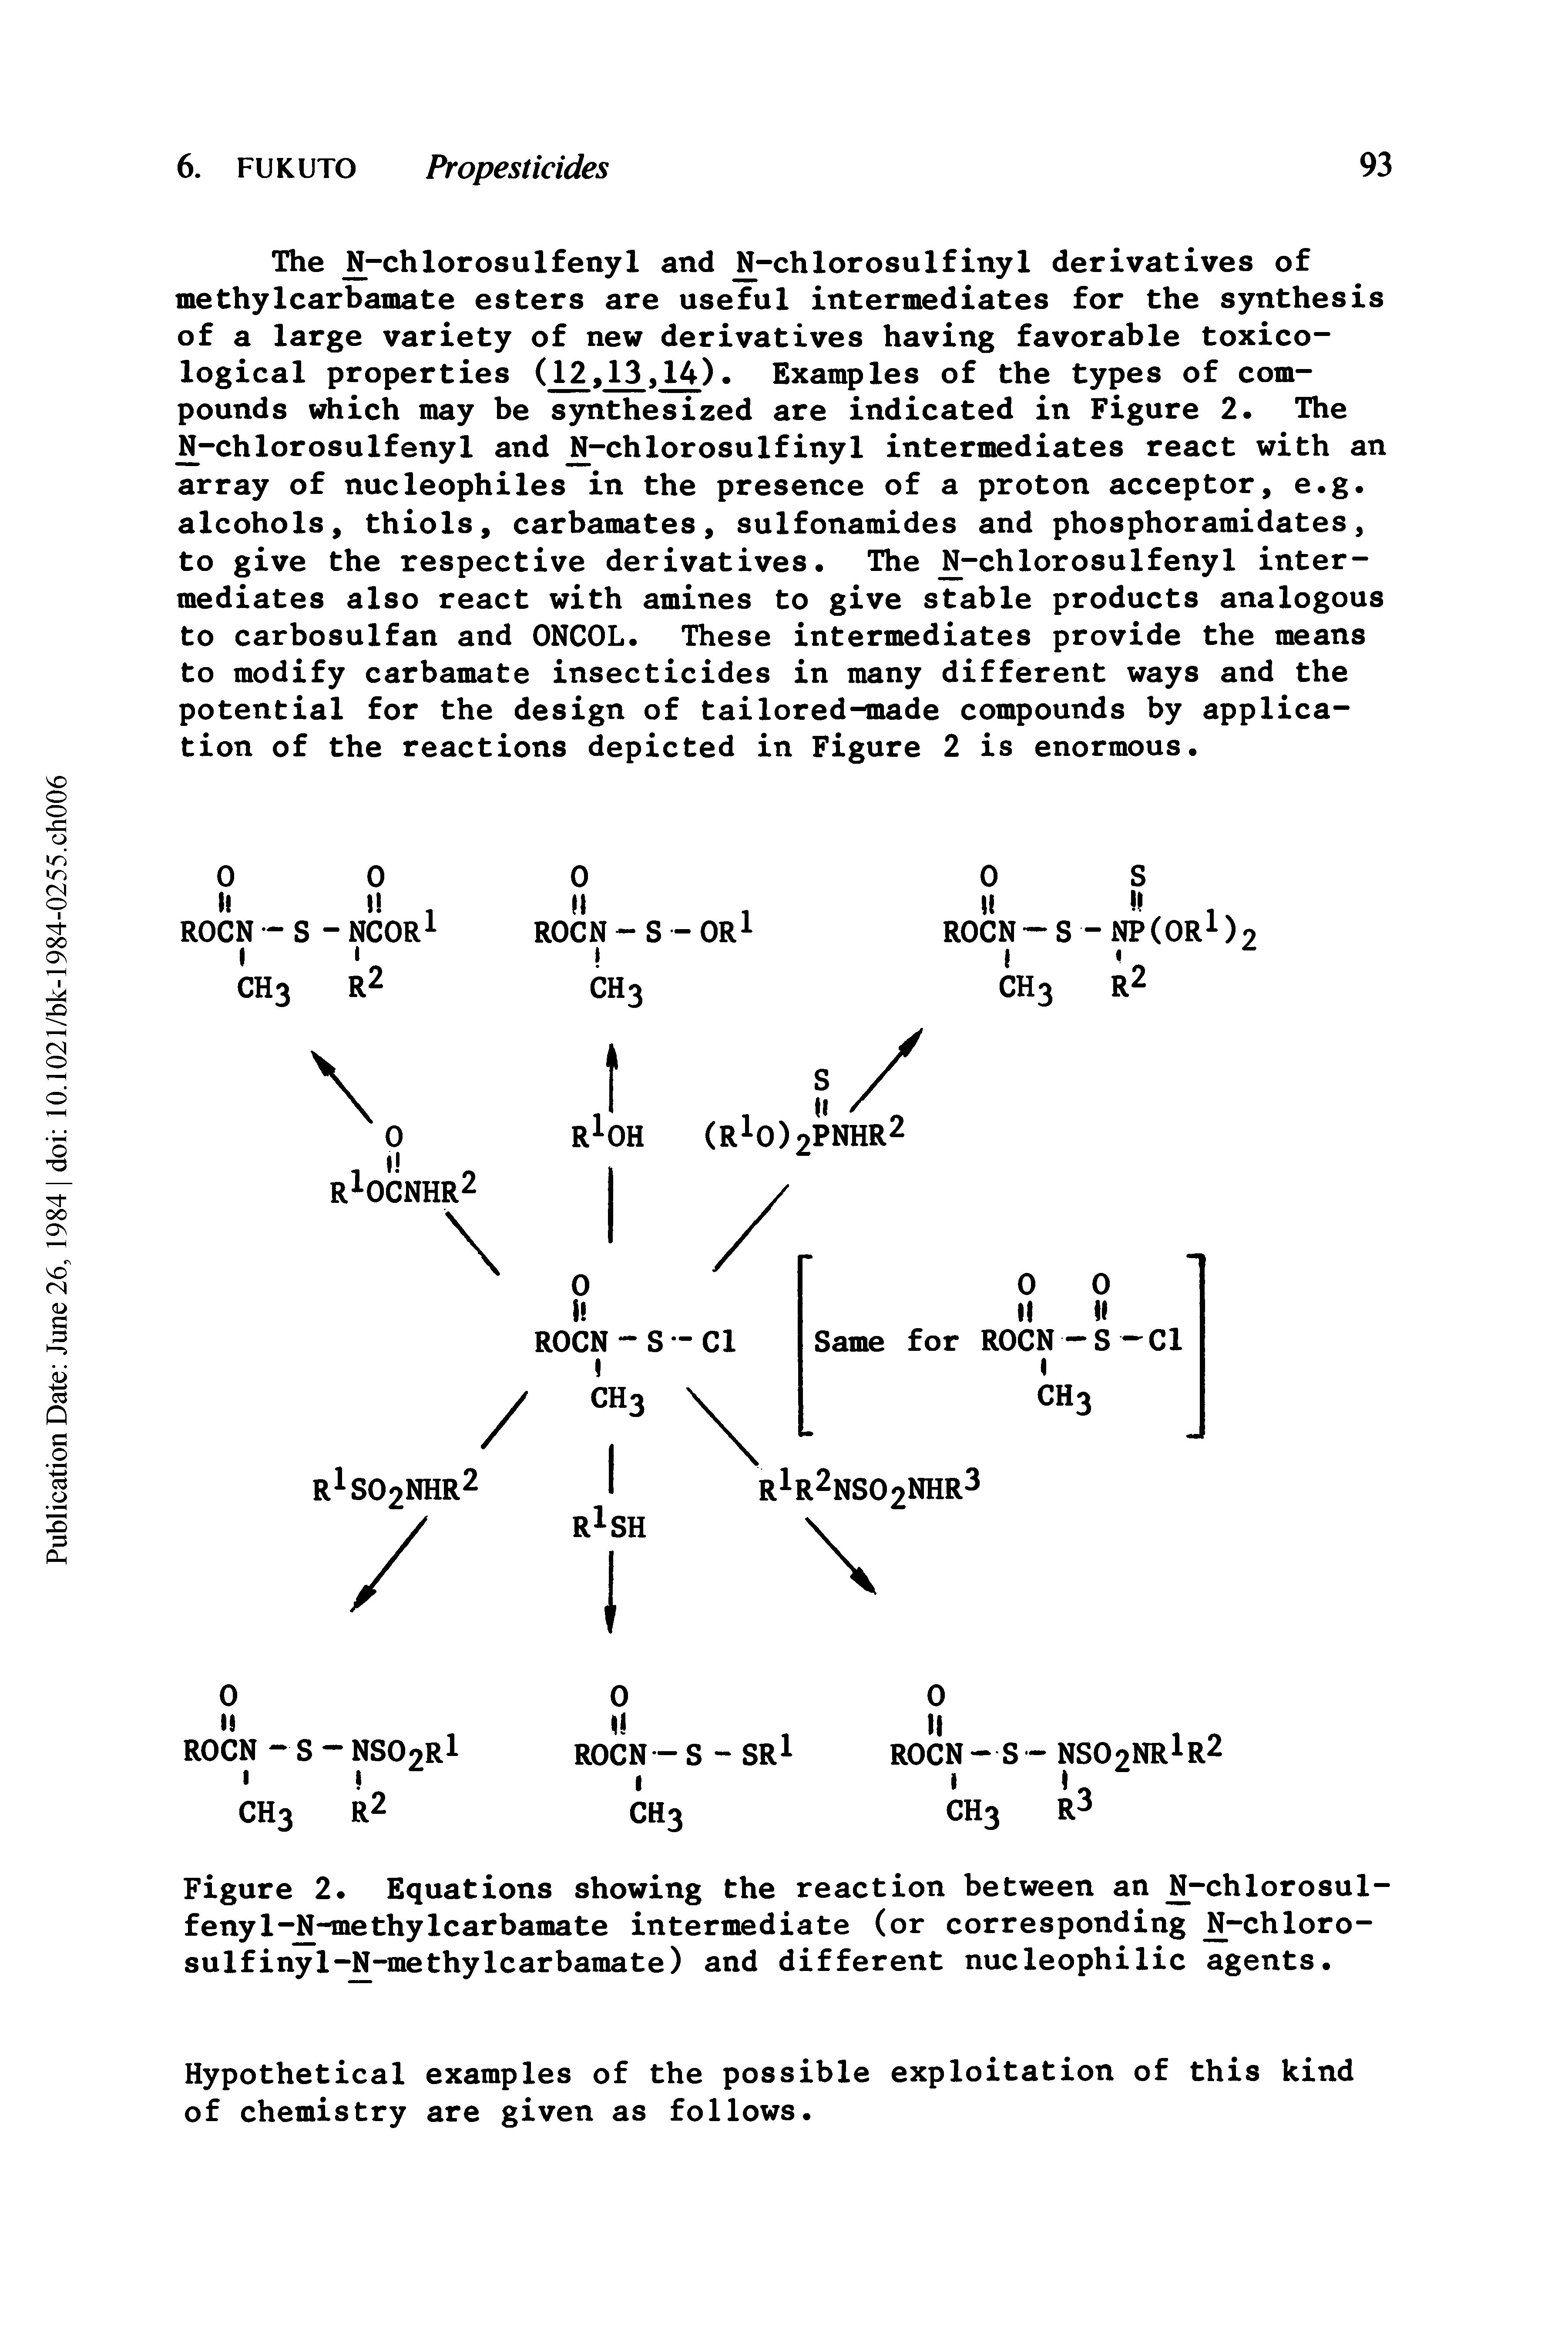 Figure 2. Equations showing the reaction between an JN-chlorosul-fenyl-IJ-methy 1 carbamate intermediate (or corresponding I -chloro-sulfinyl-N-methylcarbamate) and different nucleophilic agents.